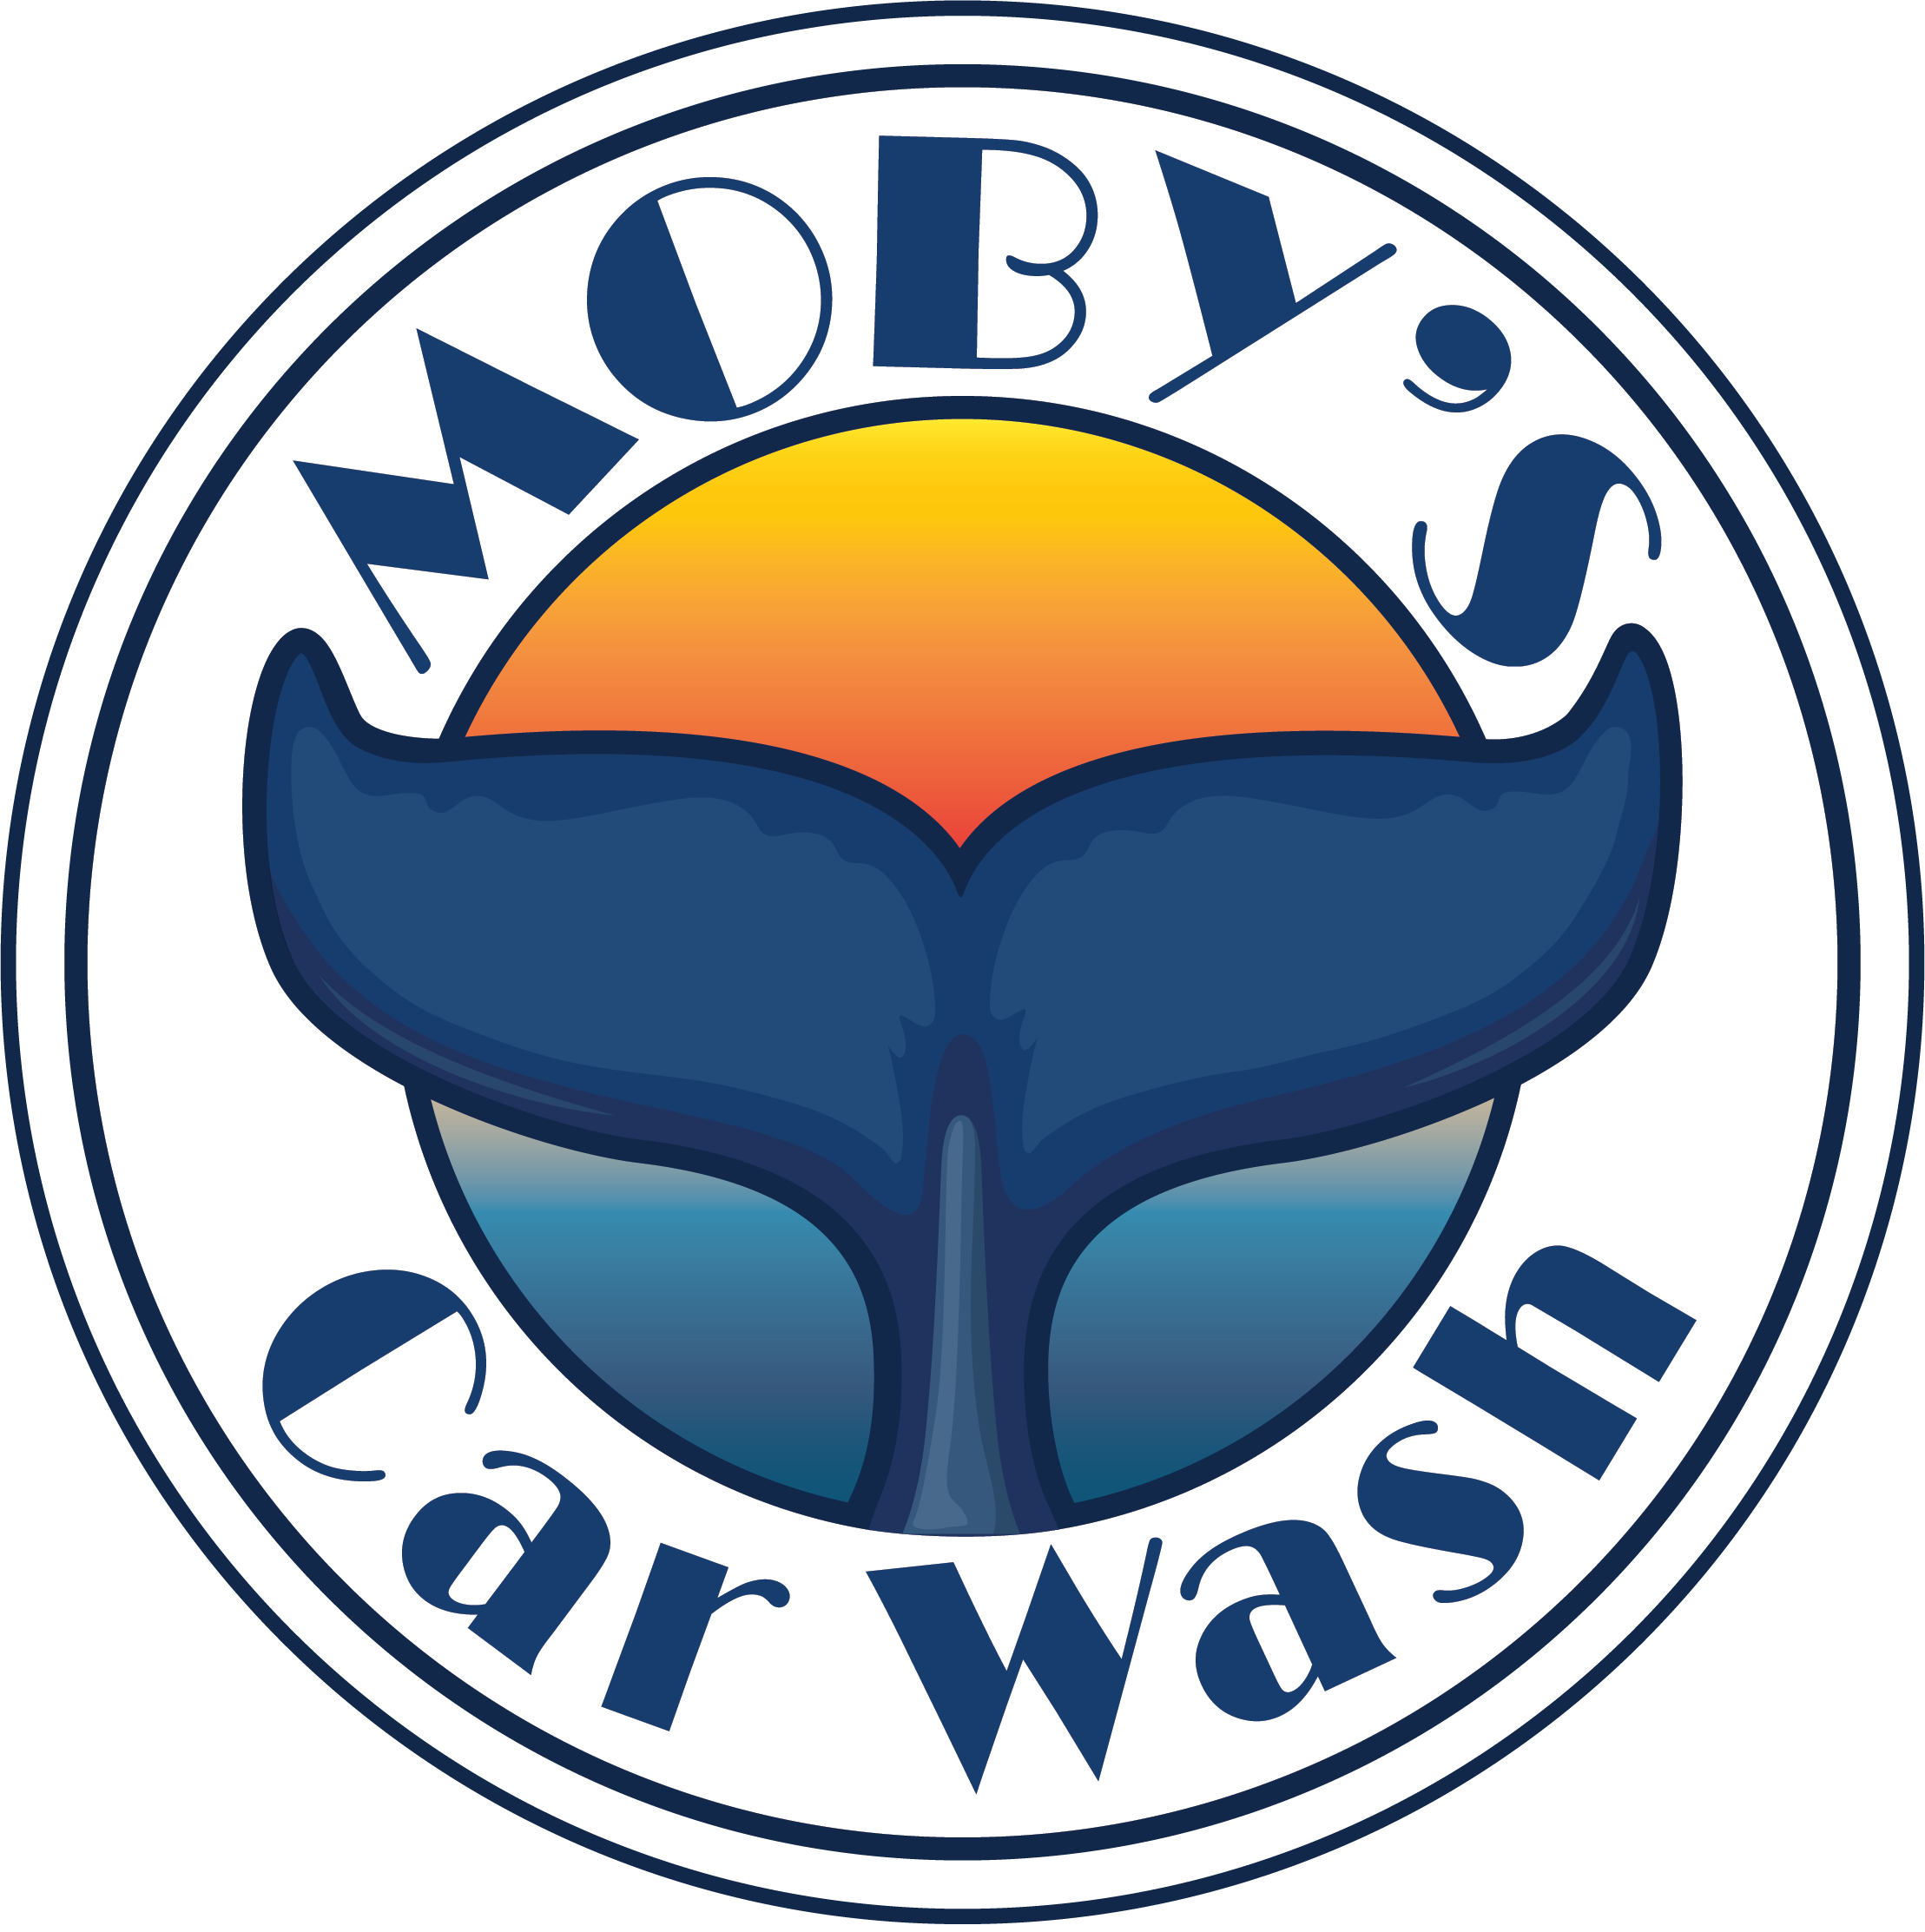 Moby's Car Wash